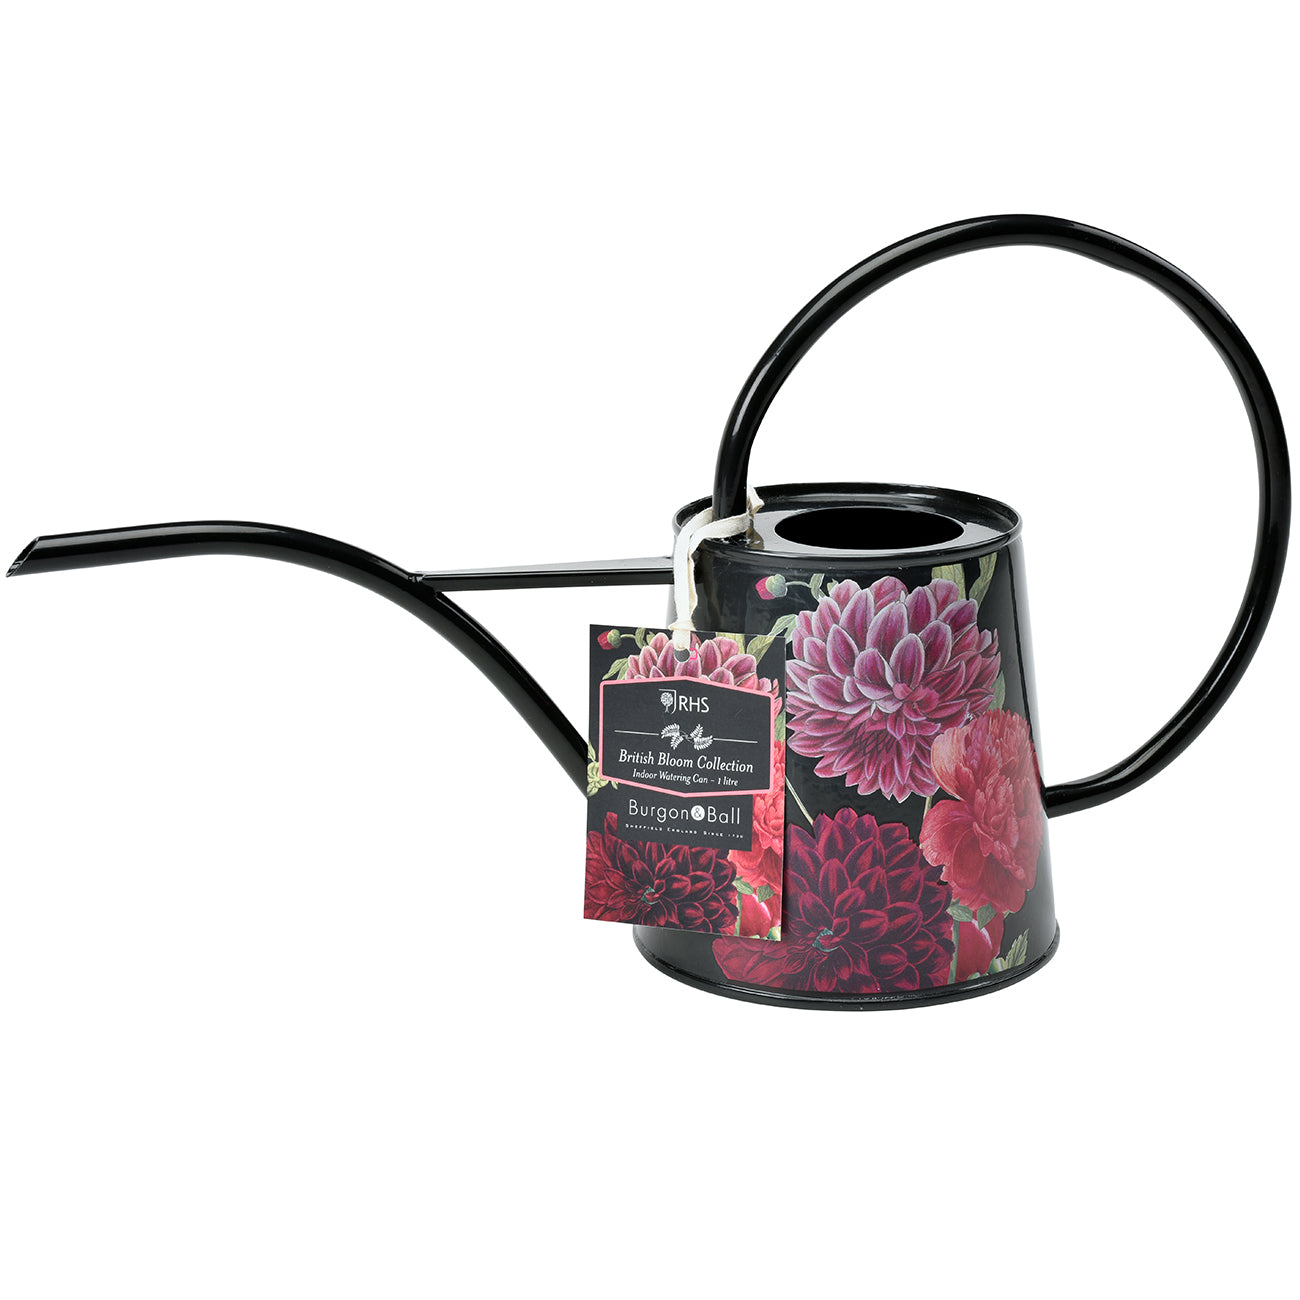 Burgon & Ball British Meadow Metal Indoor Watering Can from RHS Gifts for Gardeners Collection